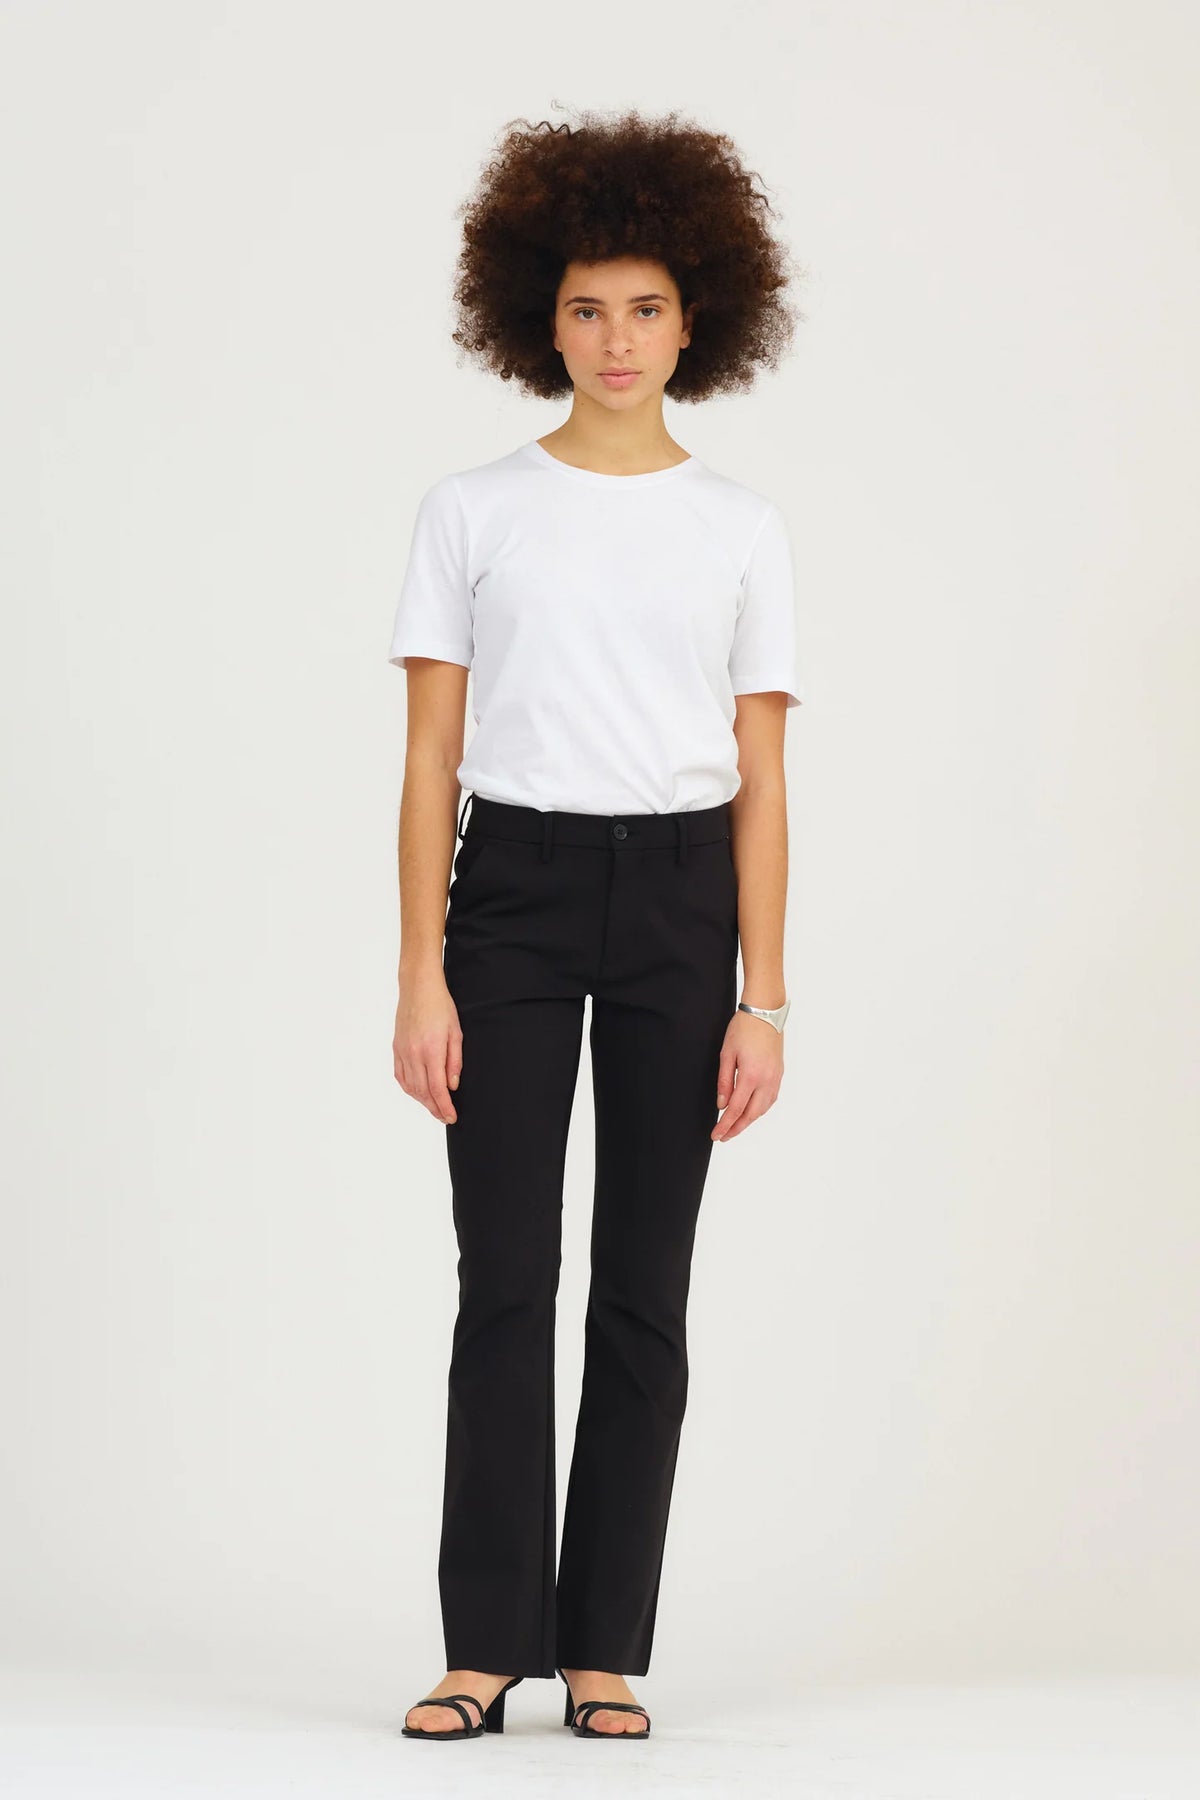 IVY Alice Flare Pant